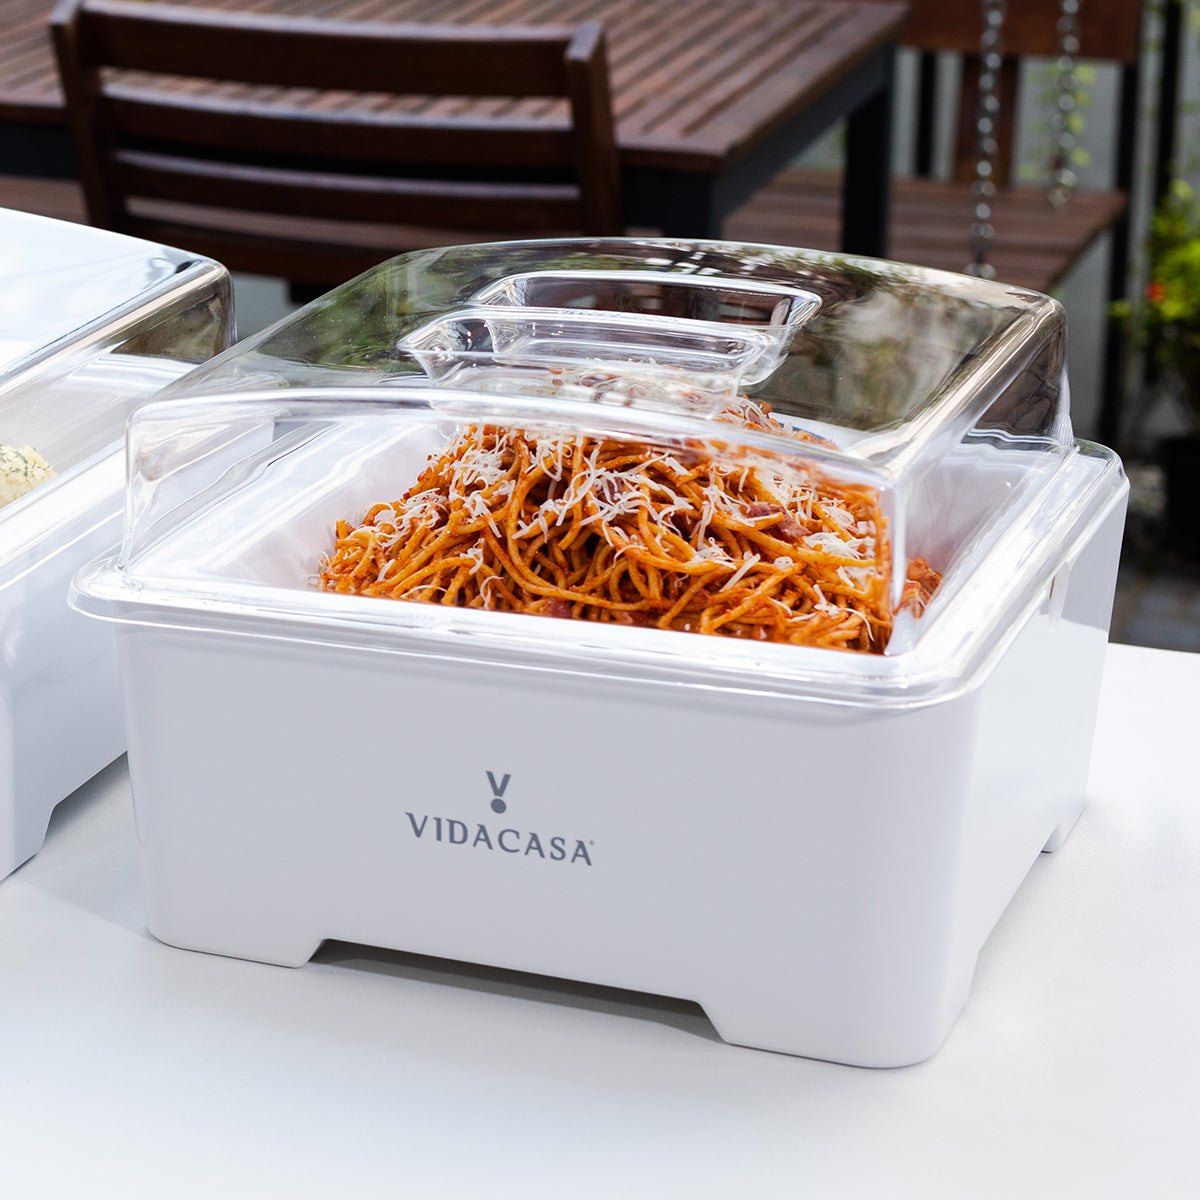 Vidacasa® Classic S305 Square is the world’s first buffetware equipment that can maintain cold foods chilled at 4ºC (39ºF) without ice; Maintain cooked foods hot at 80ºC (176ºF) without dangling cords or chafing fuels.